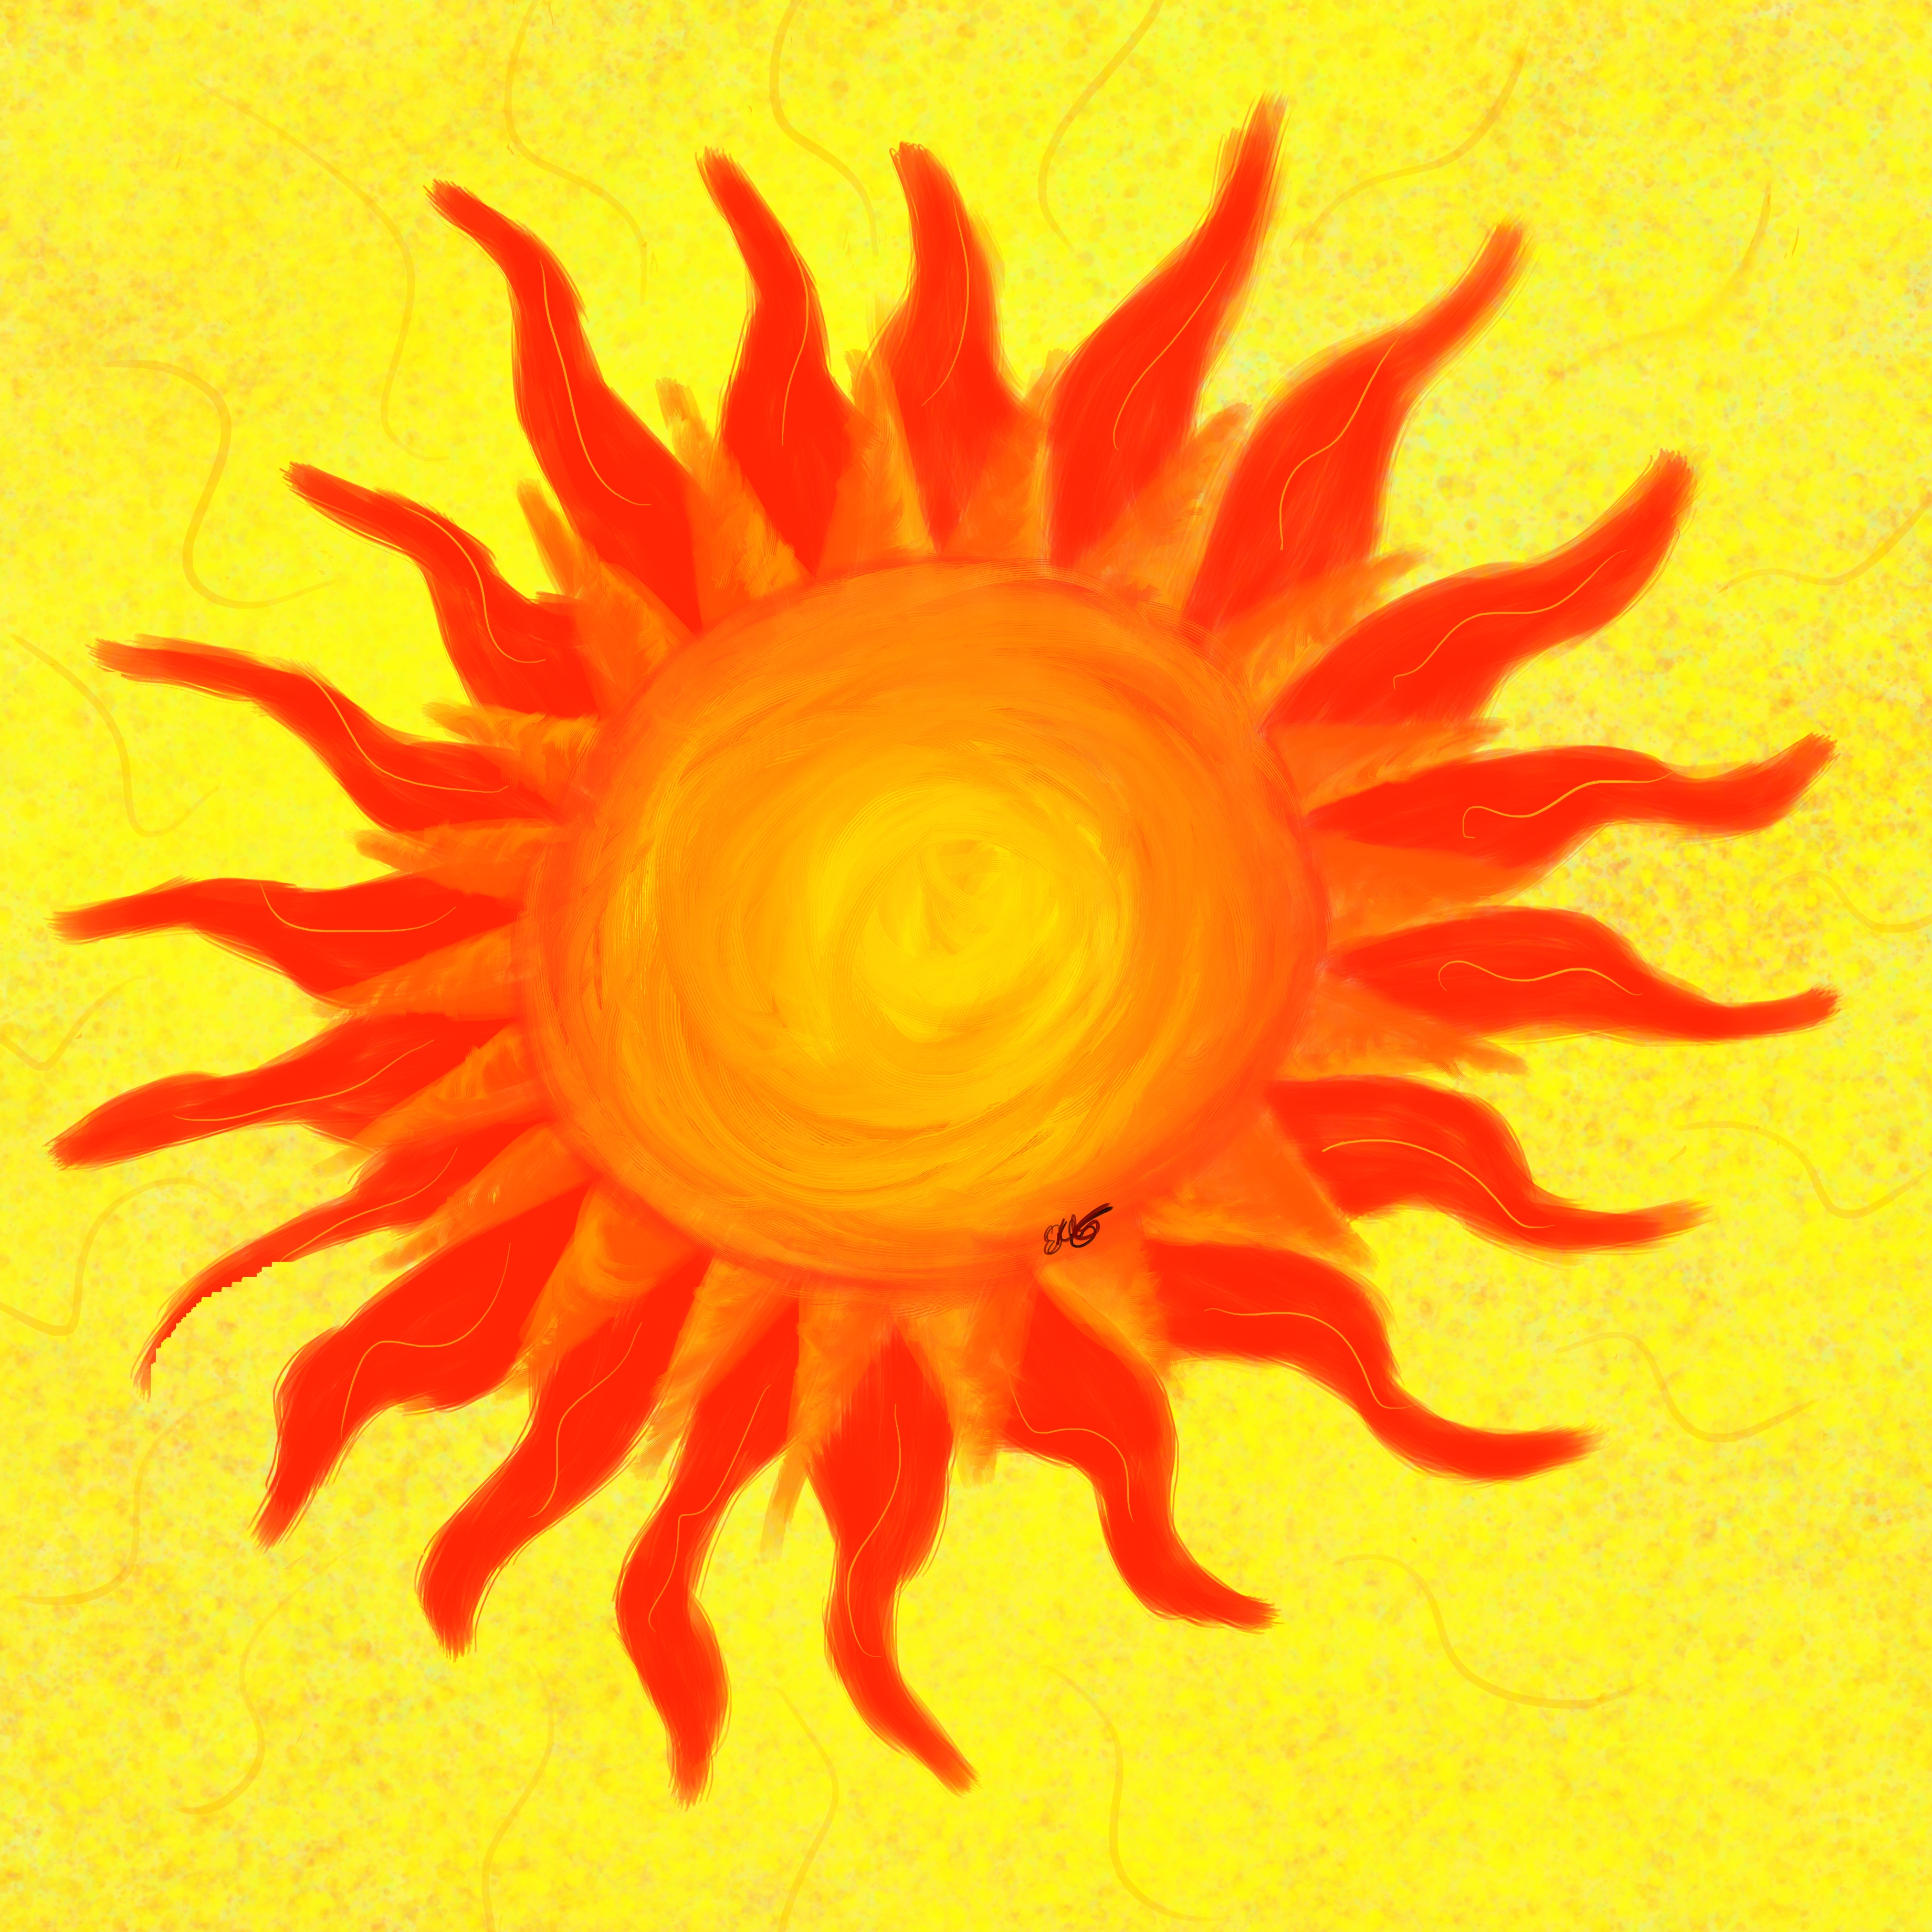 image of 'Long Time Sun'